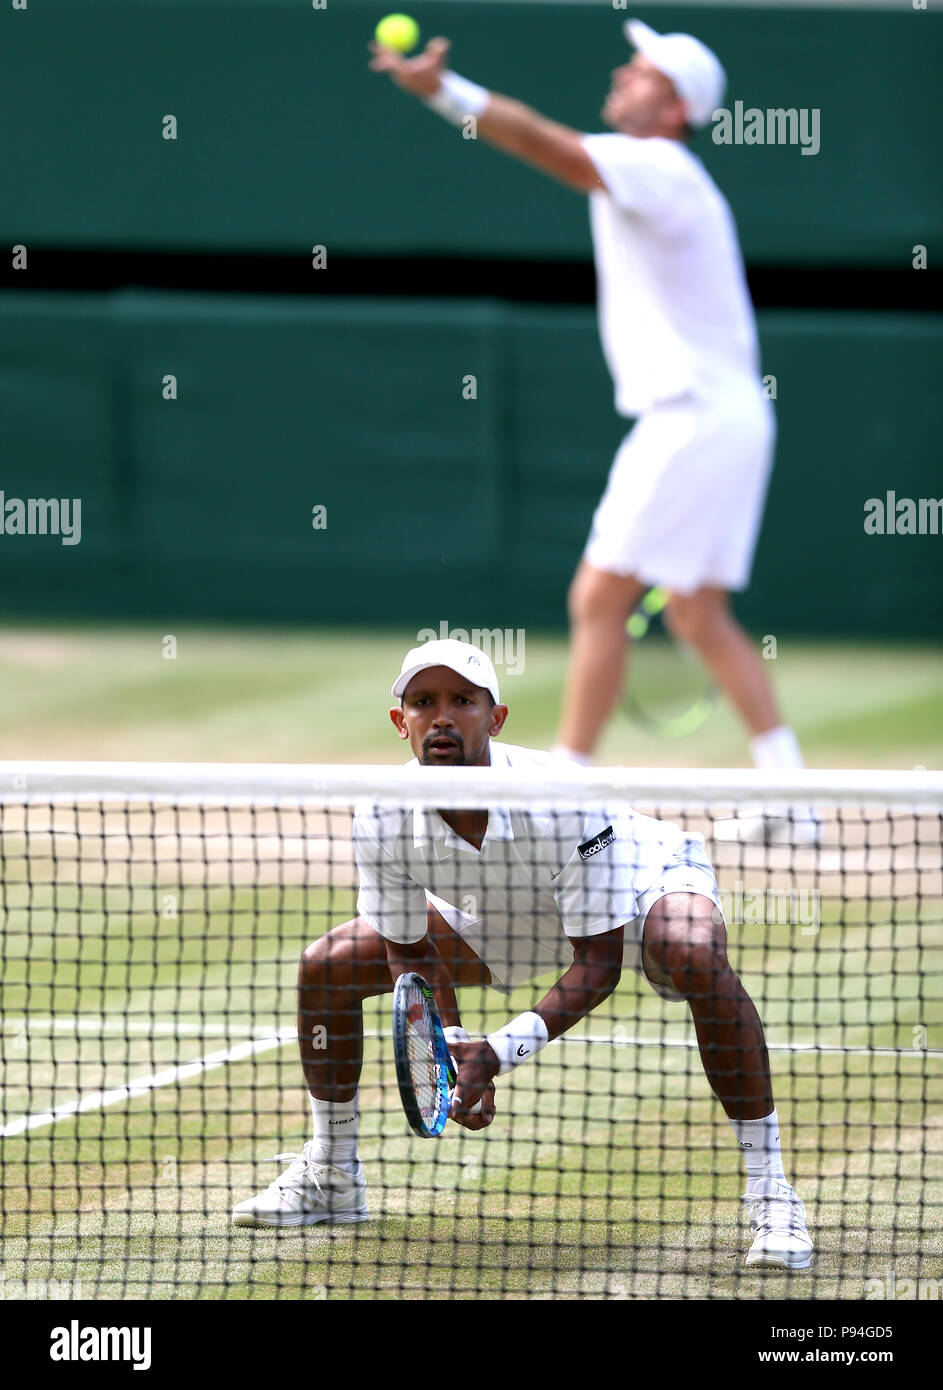 Raven Klaasen and Michael Venus during the Gentlemen's Doubles Final on day twelve of the Wimbledon Championships at the All England Lawn Tennis and Croquet Club, Wimbledon. PRESS ASSOCIATION Photo. Picture date: Saturday July 14, 2018. See PA story TENNIS Wimbledon. Photo credit should read: Steven Paston/PA Wire. Stock Photo